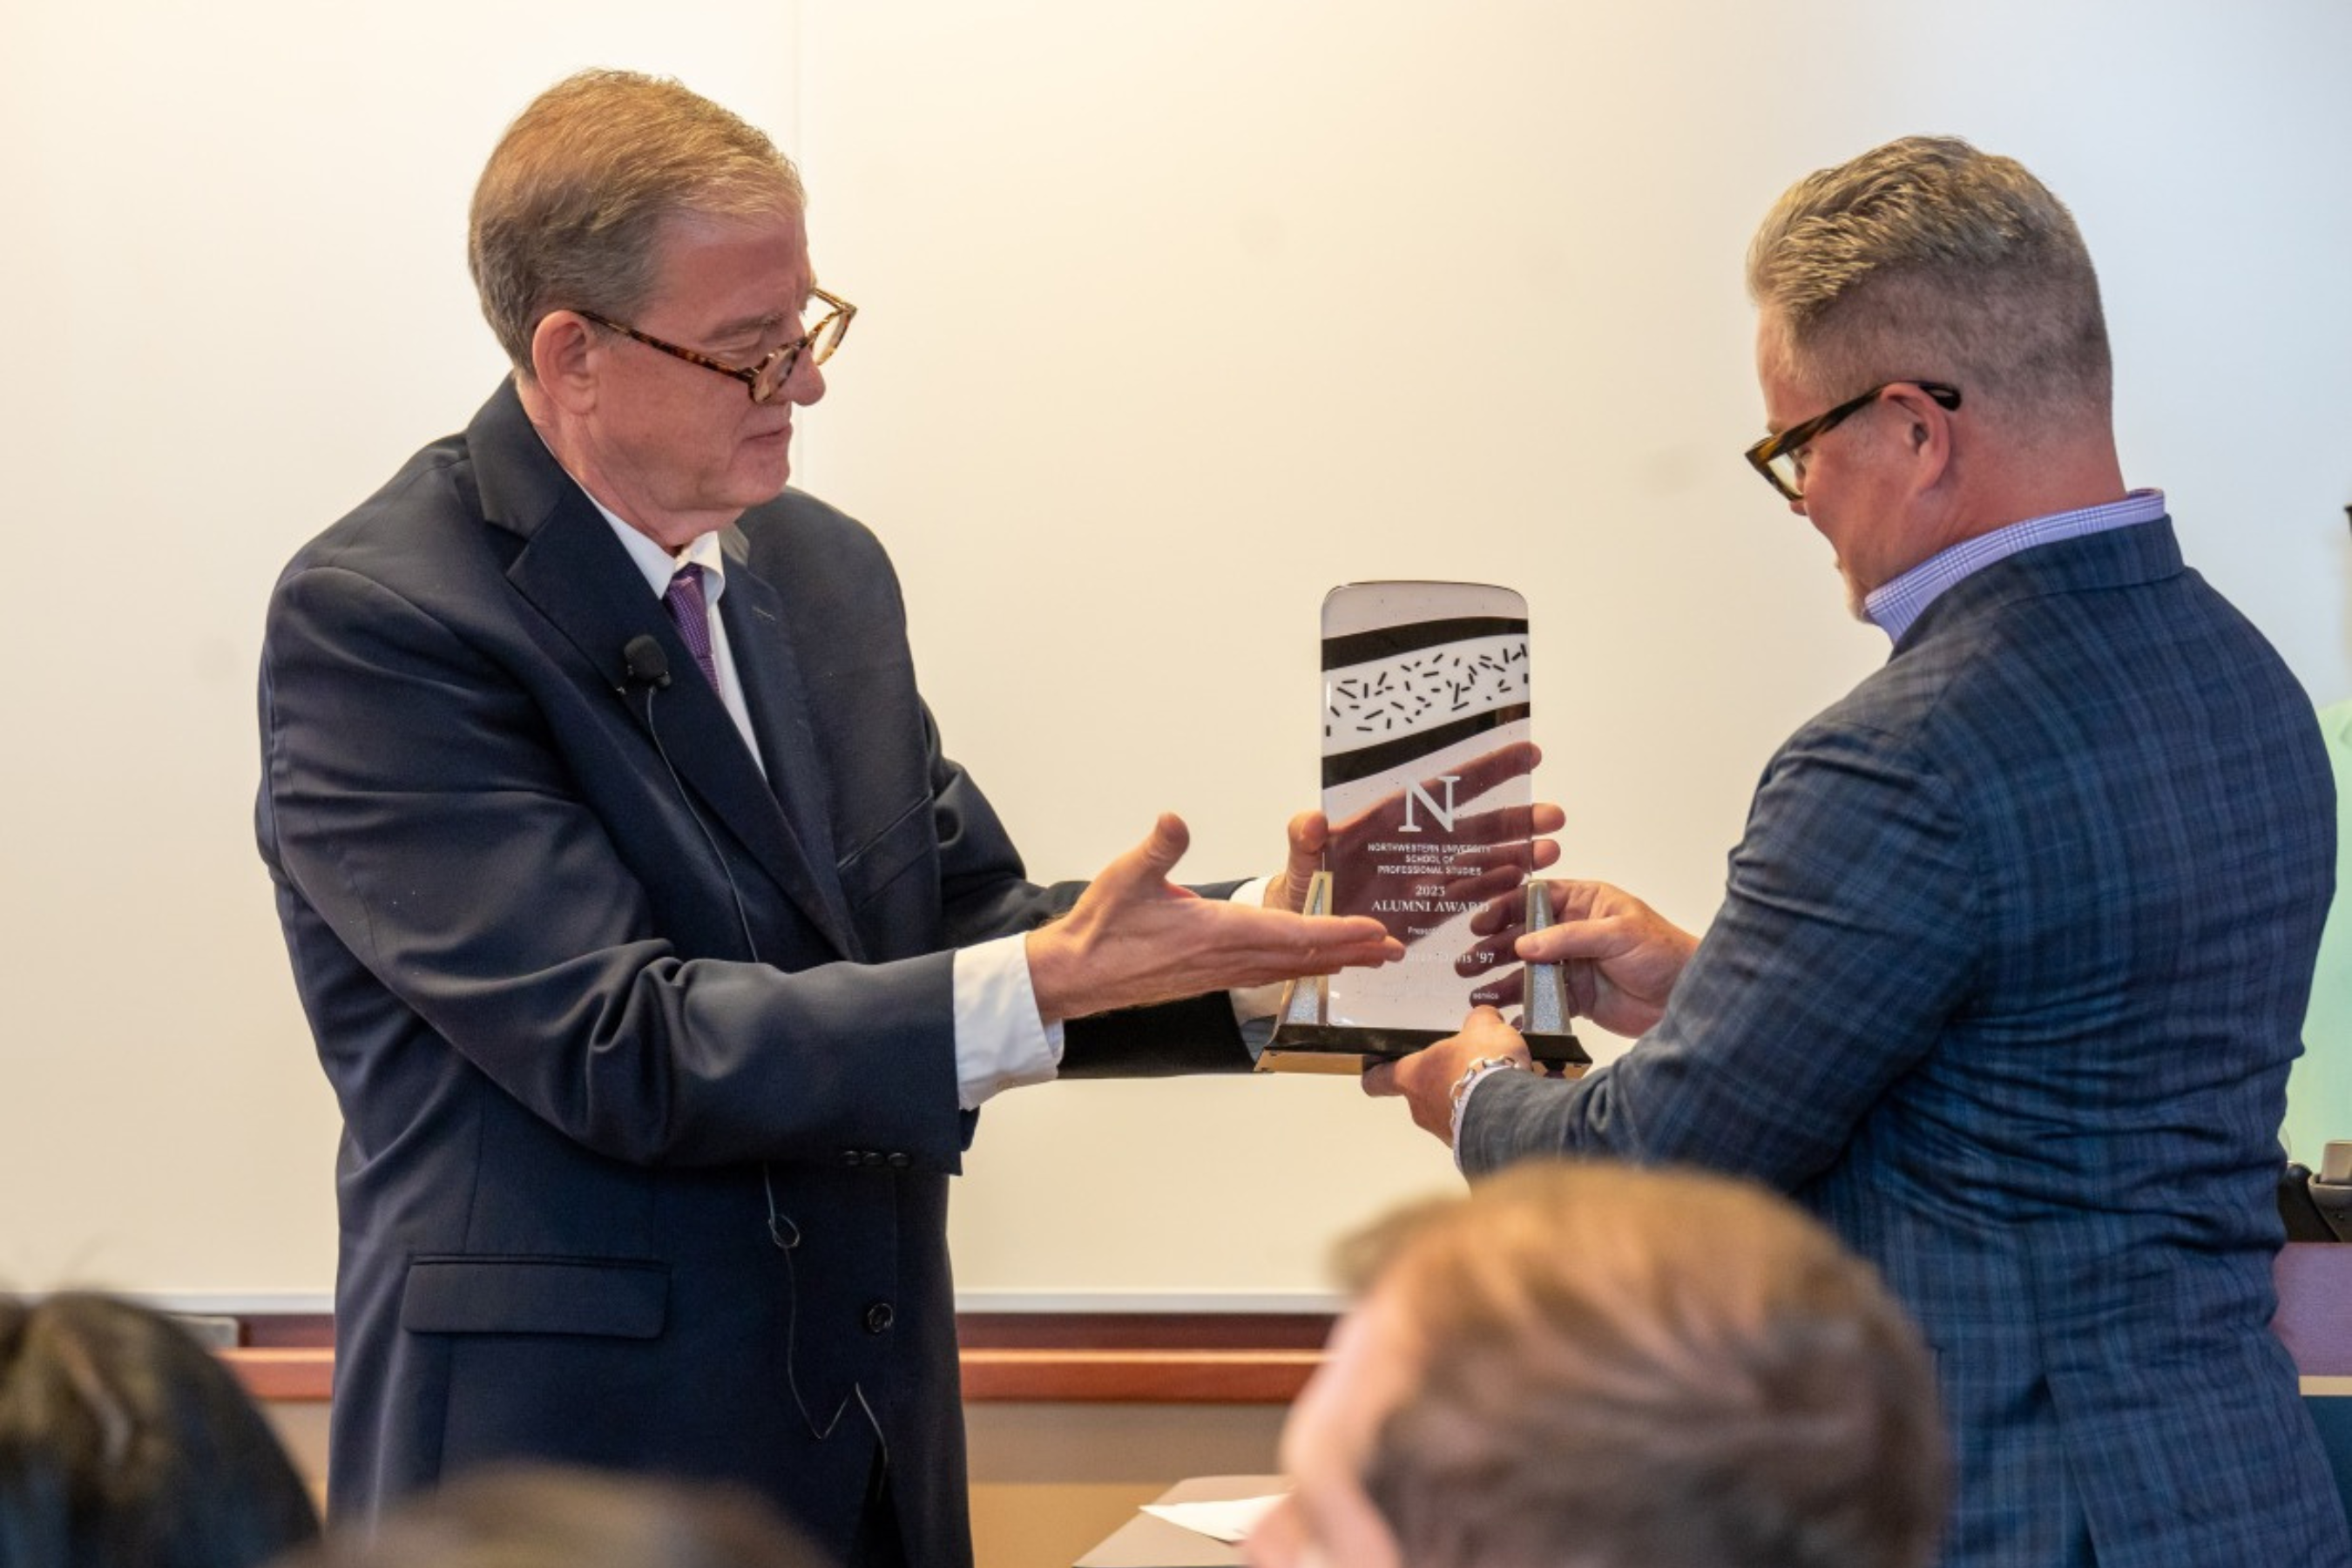 Jon Suarez-Davis '97 (right) was presented with the award by SPS Dean Tom Gibbons, as part of the closing keynote during the 2023 SPS Symposium.  Photo: Joseph Yun.